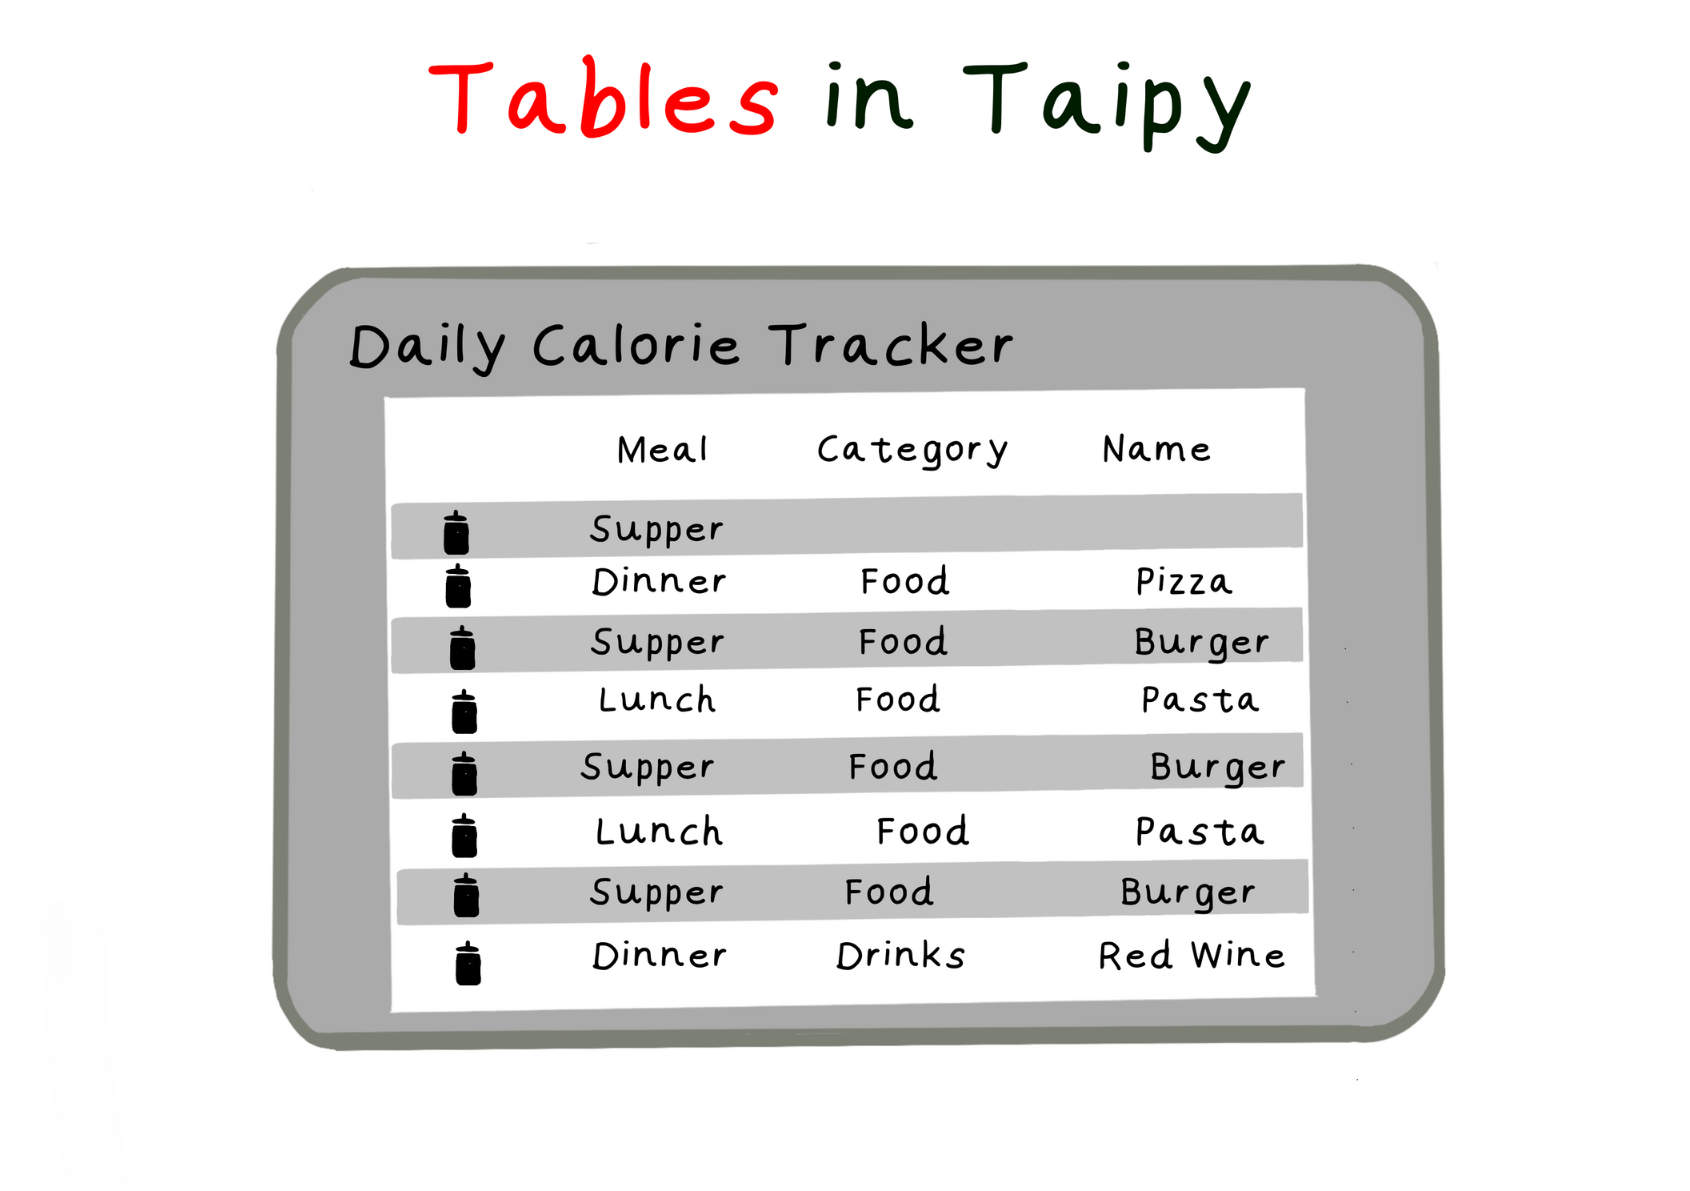 Tables in Taipy